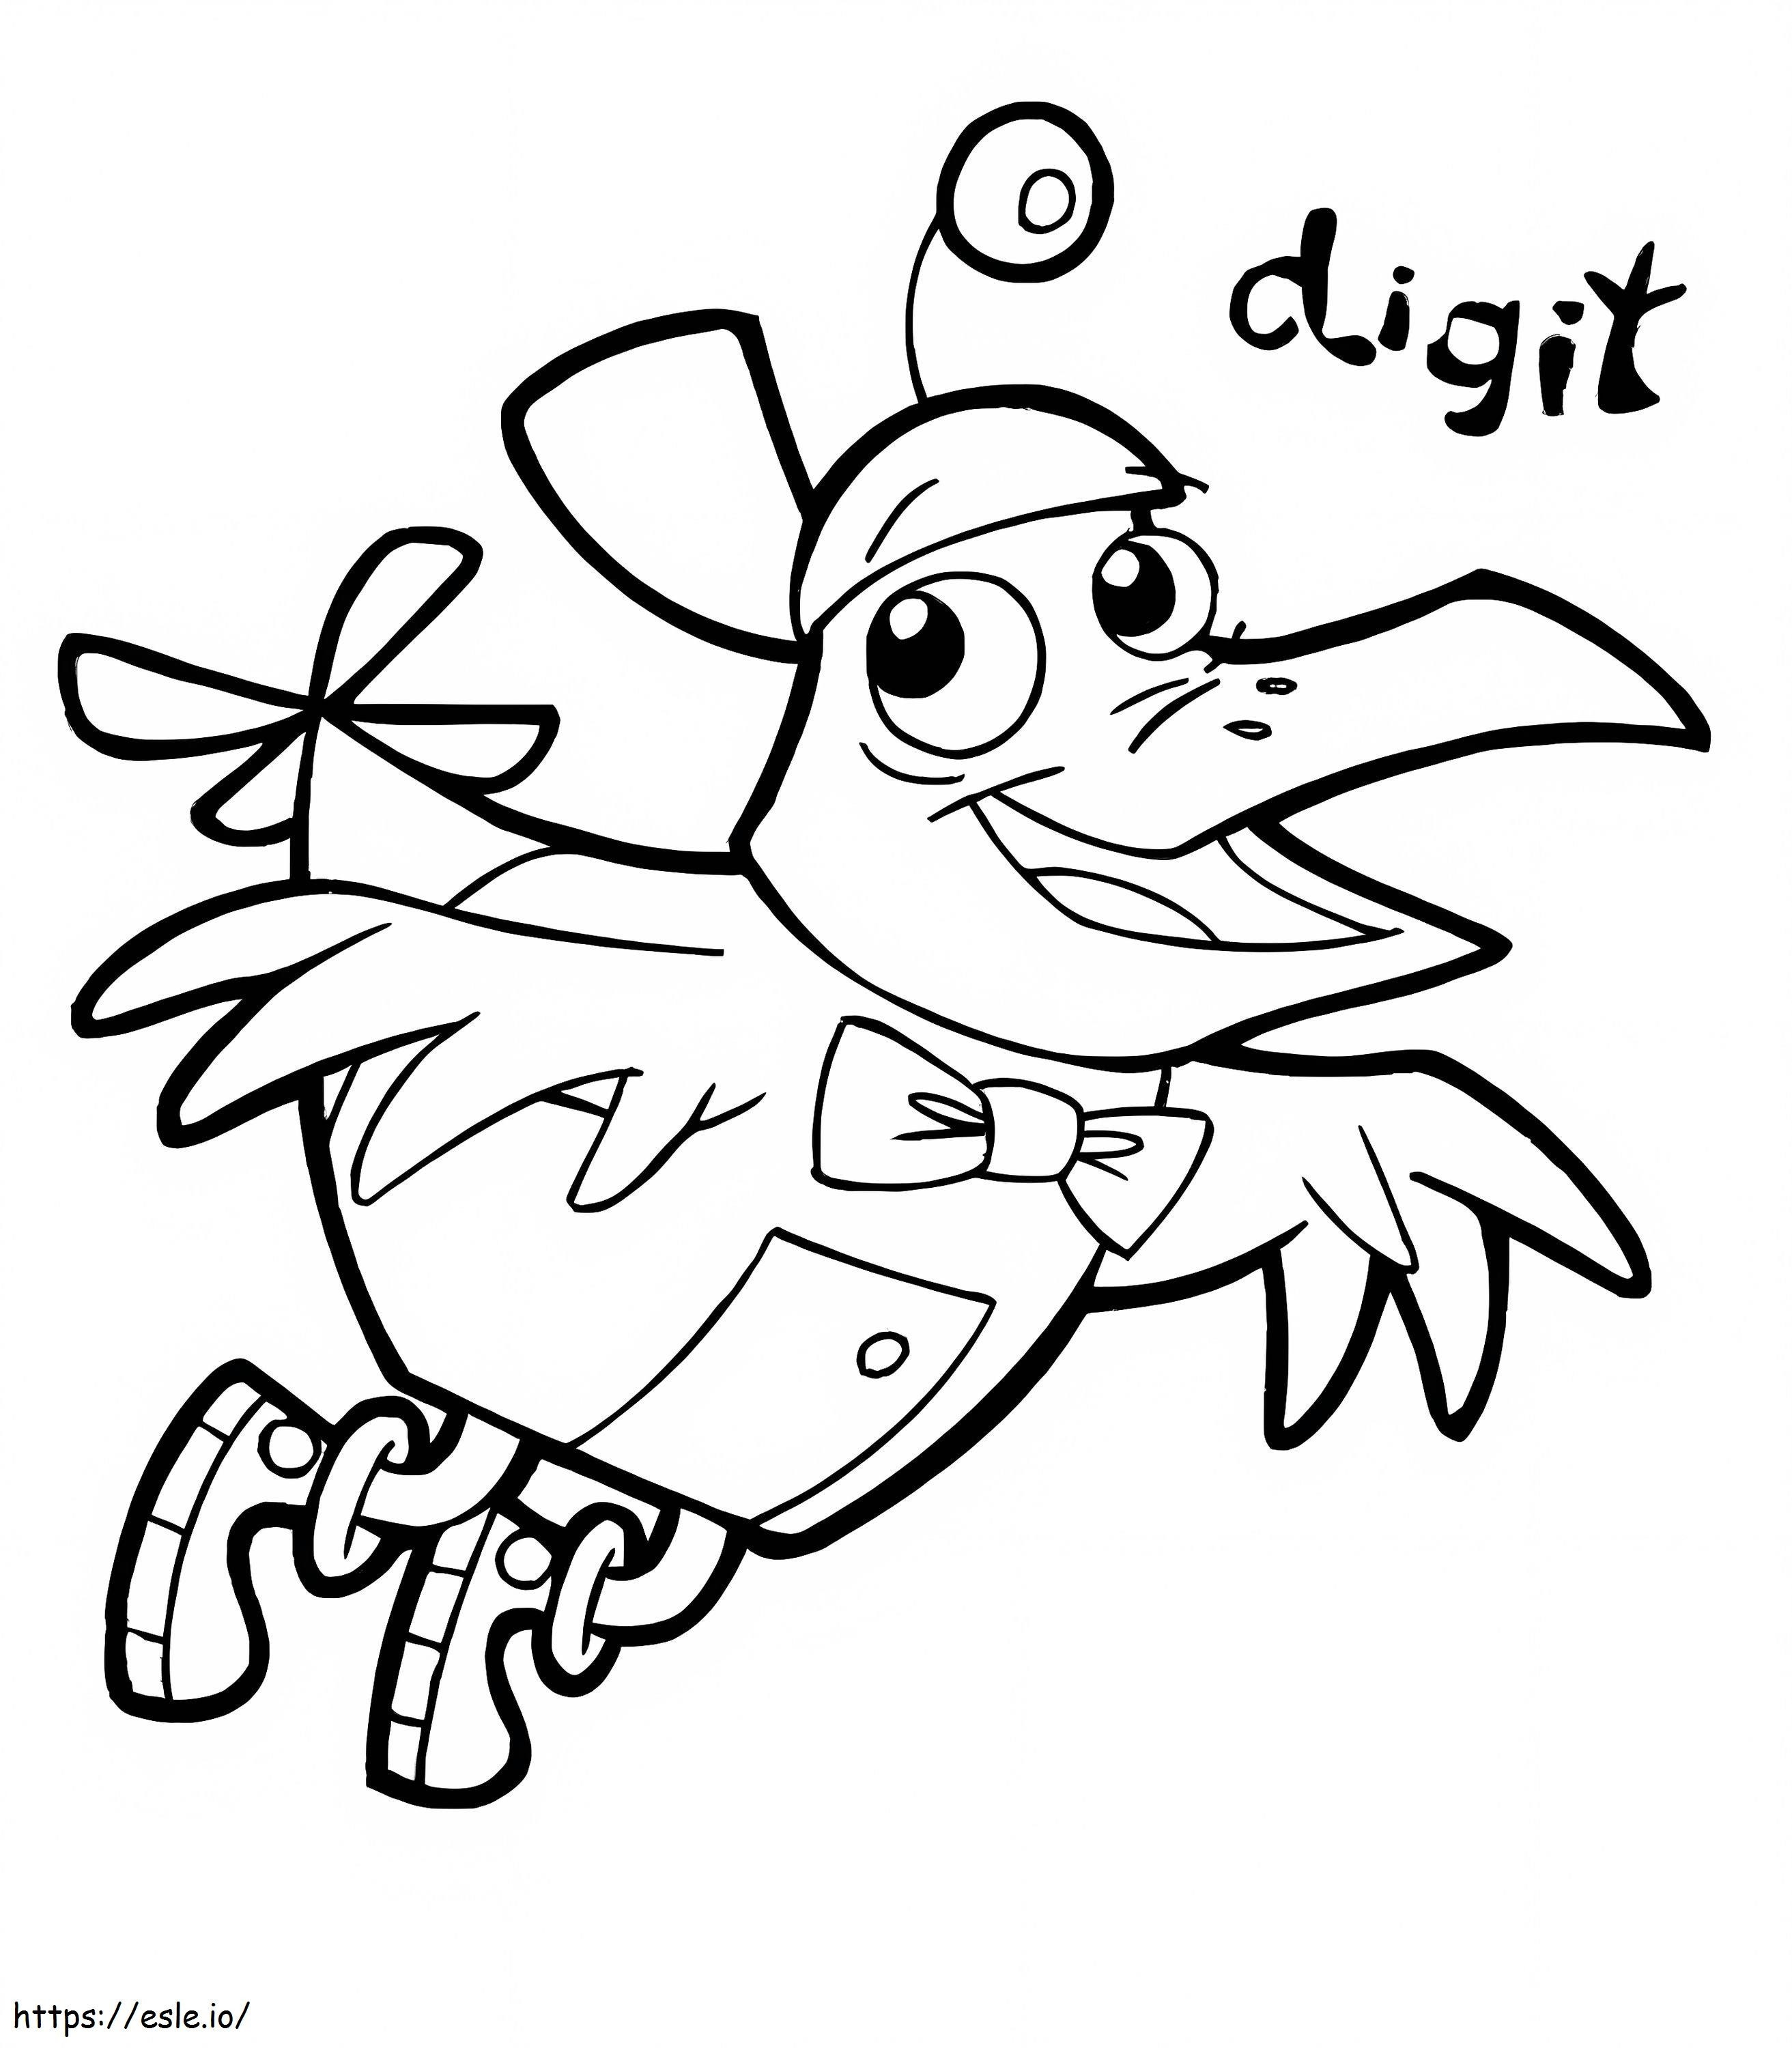 Cyberchase Digit coloring page